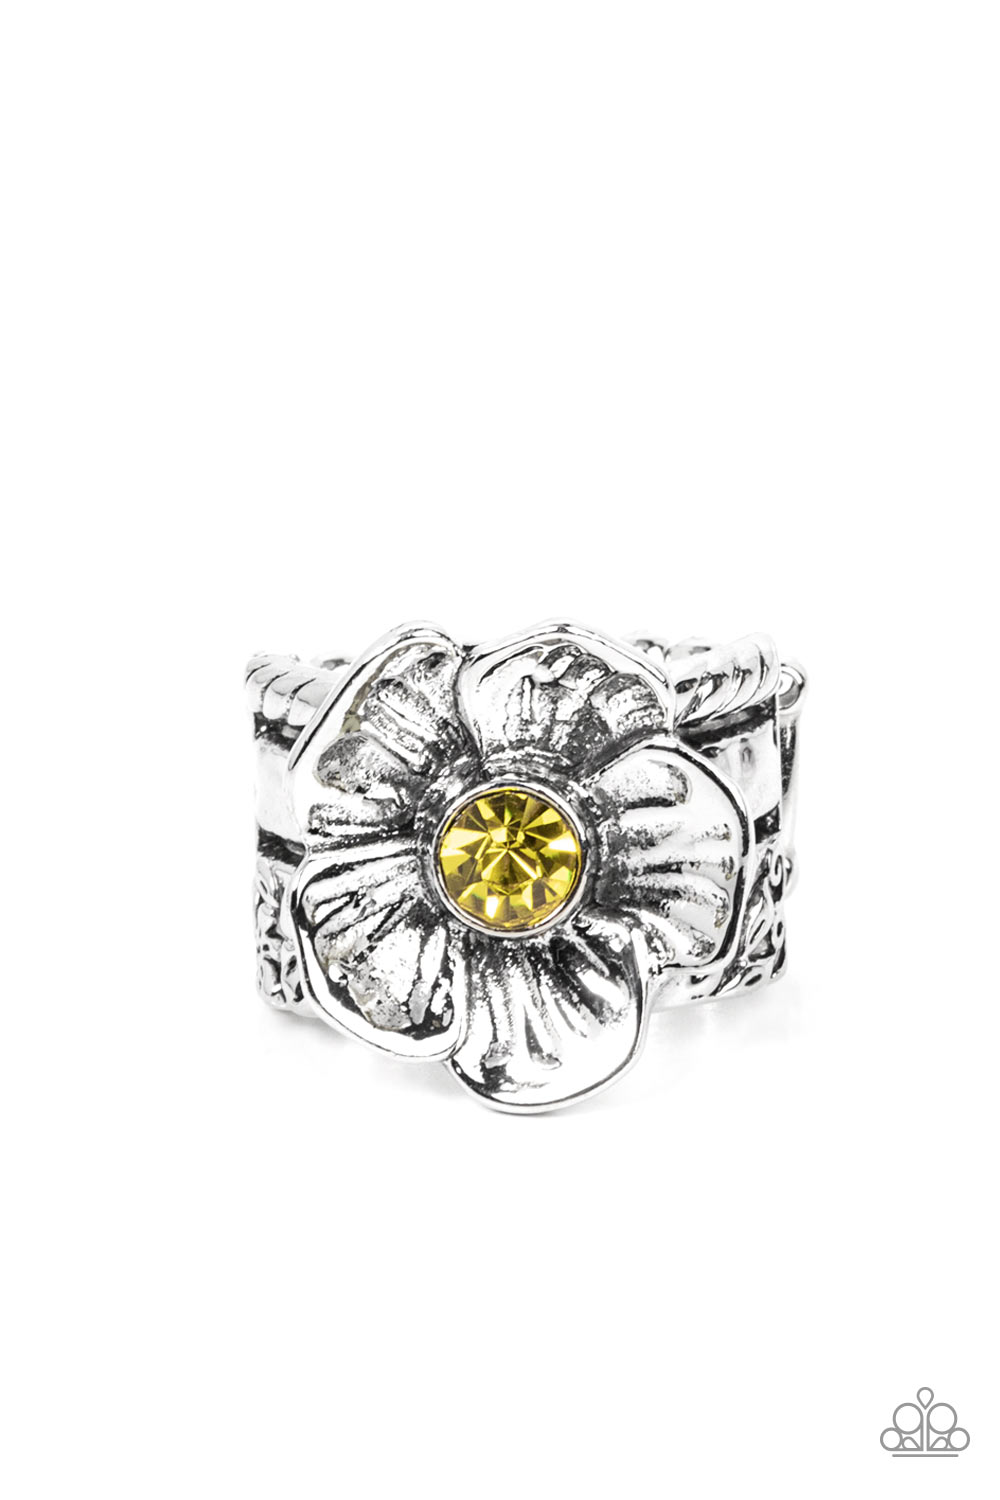 Prismatically Petunia Yellow Ring - Paparazzi Accessories  Textured silver petals gently gather around a sparkling yellow rhinestone center, blooming into a dazzling floral centerpiece atop the finger. Features a stretchy band for a flexible fit.  Sold as one individual ring.